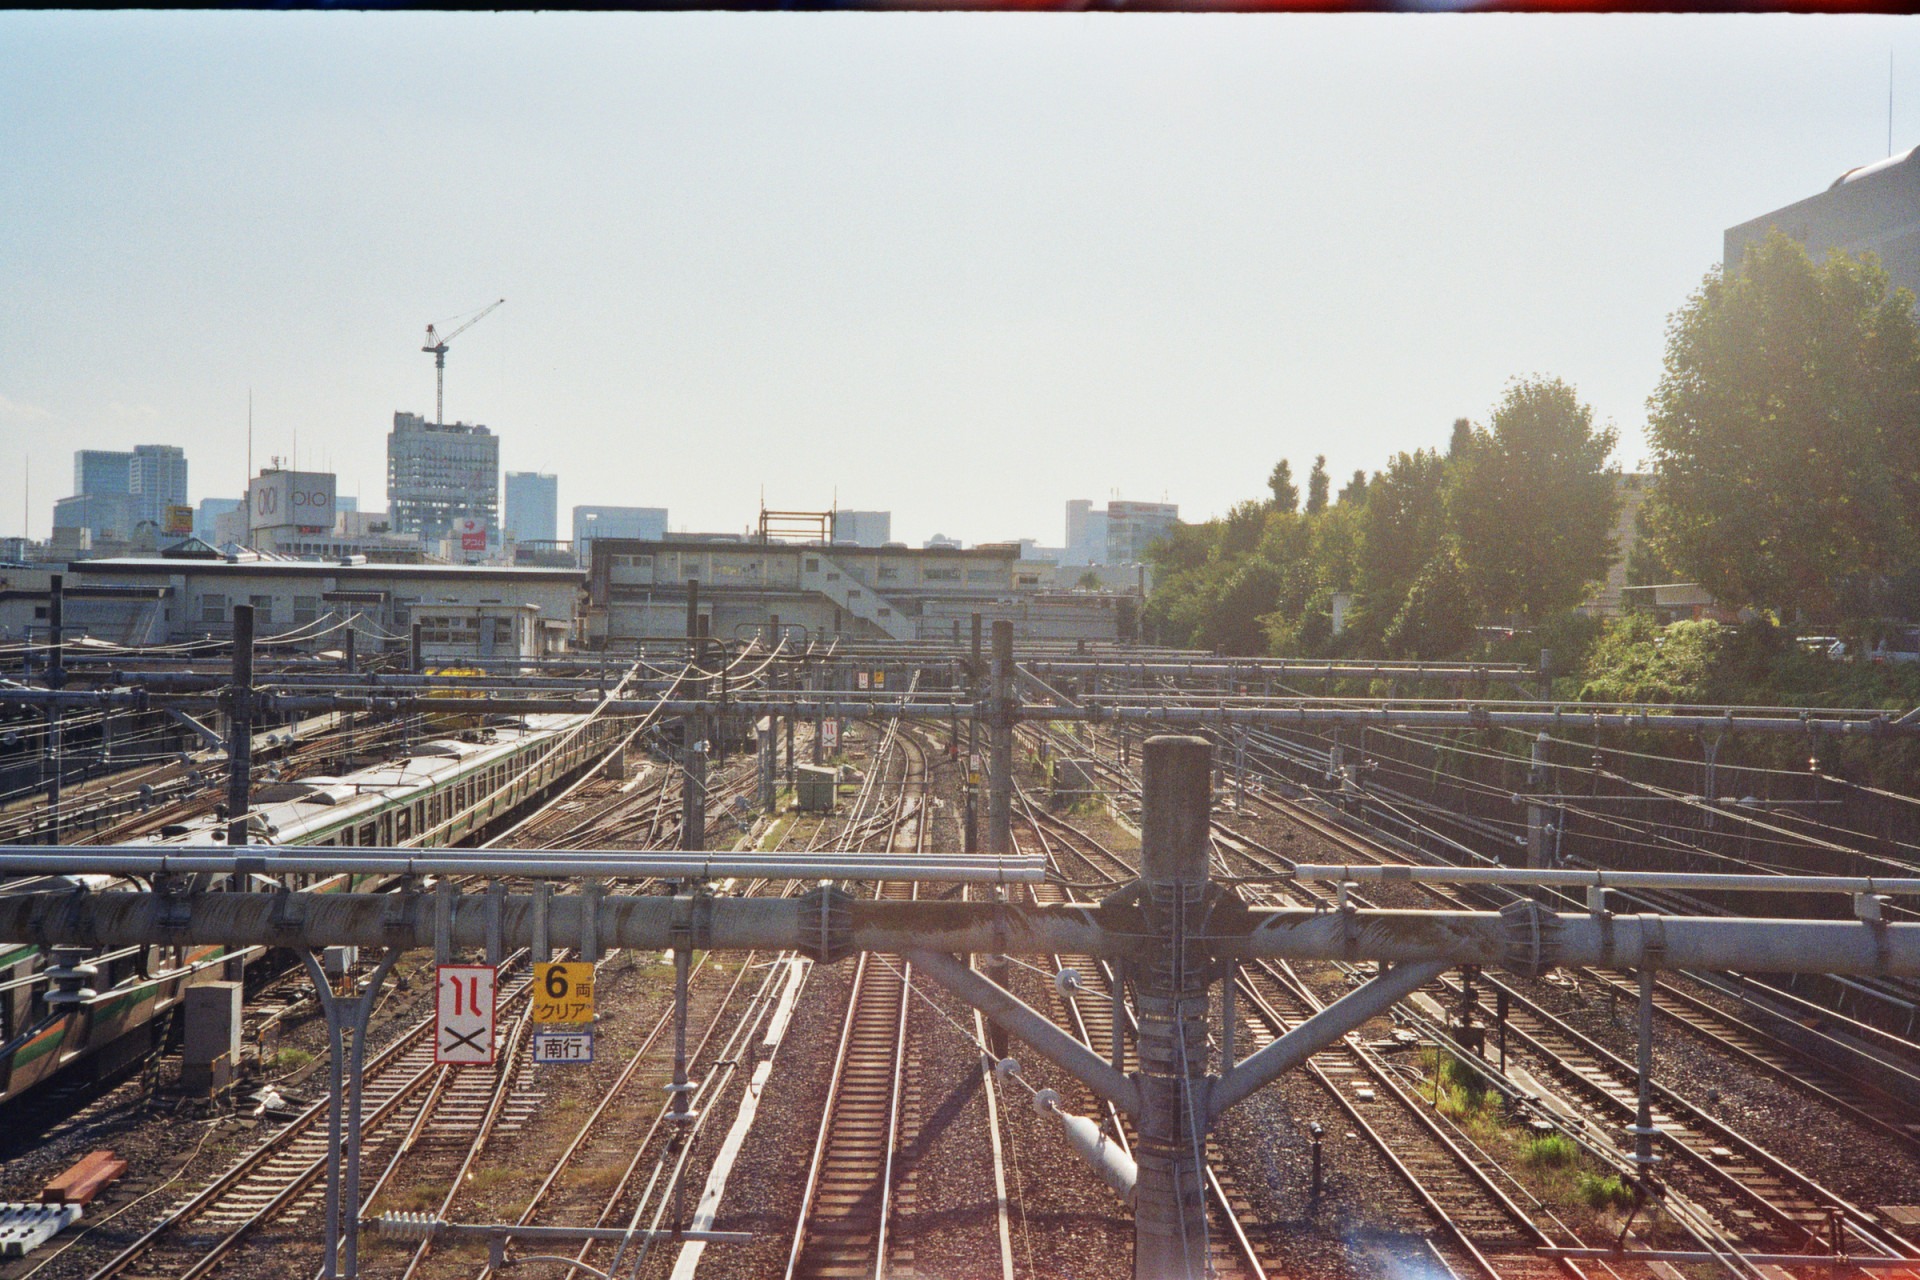 an overview of the train tracks and the pipe network on top of it around the train station shot under the bright open sky